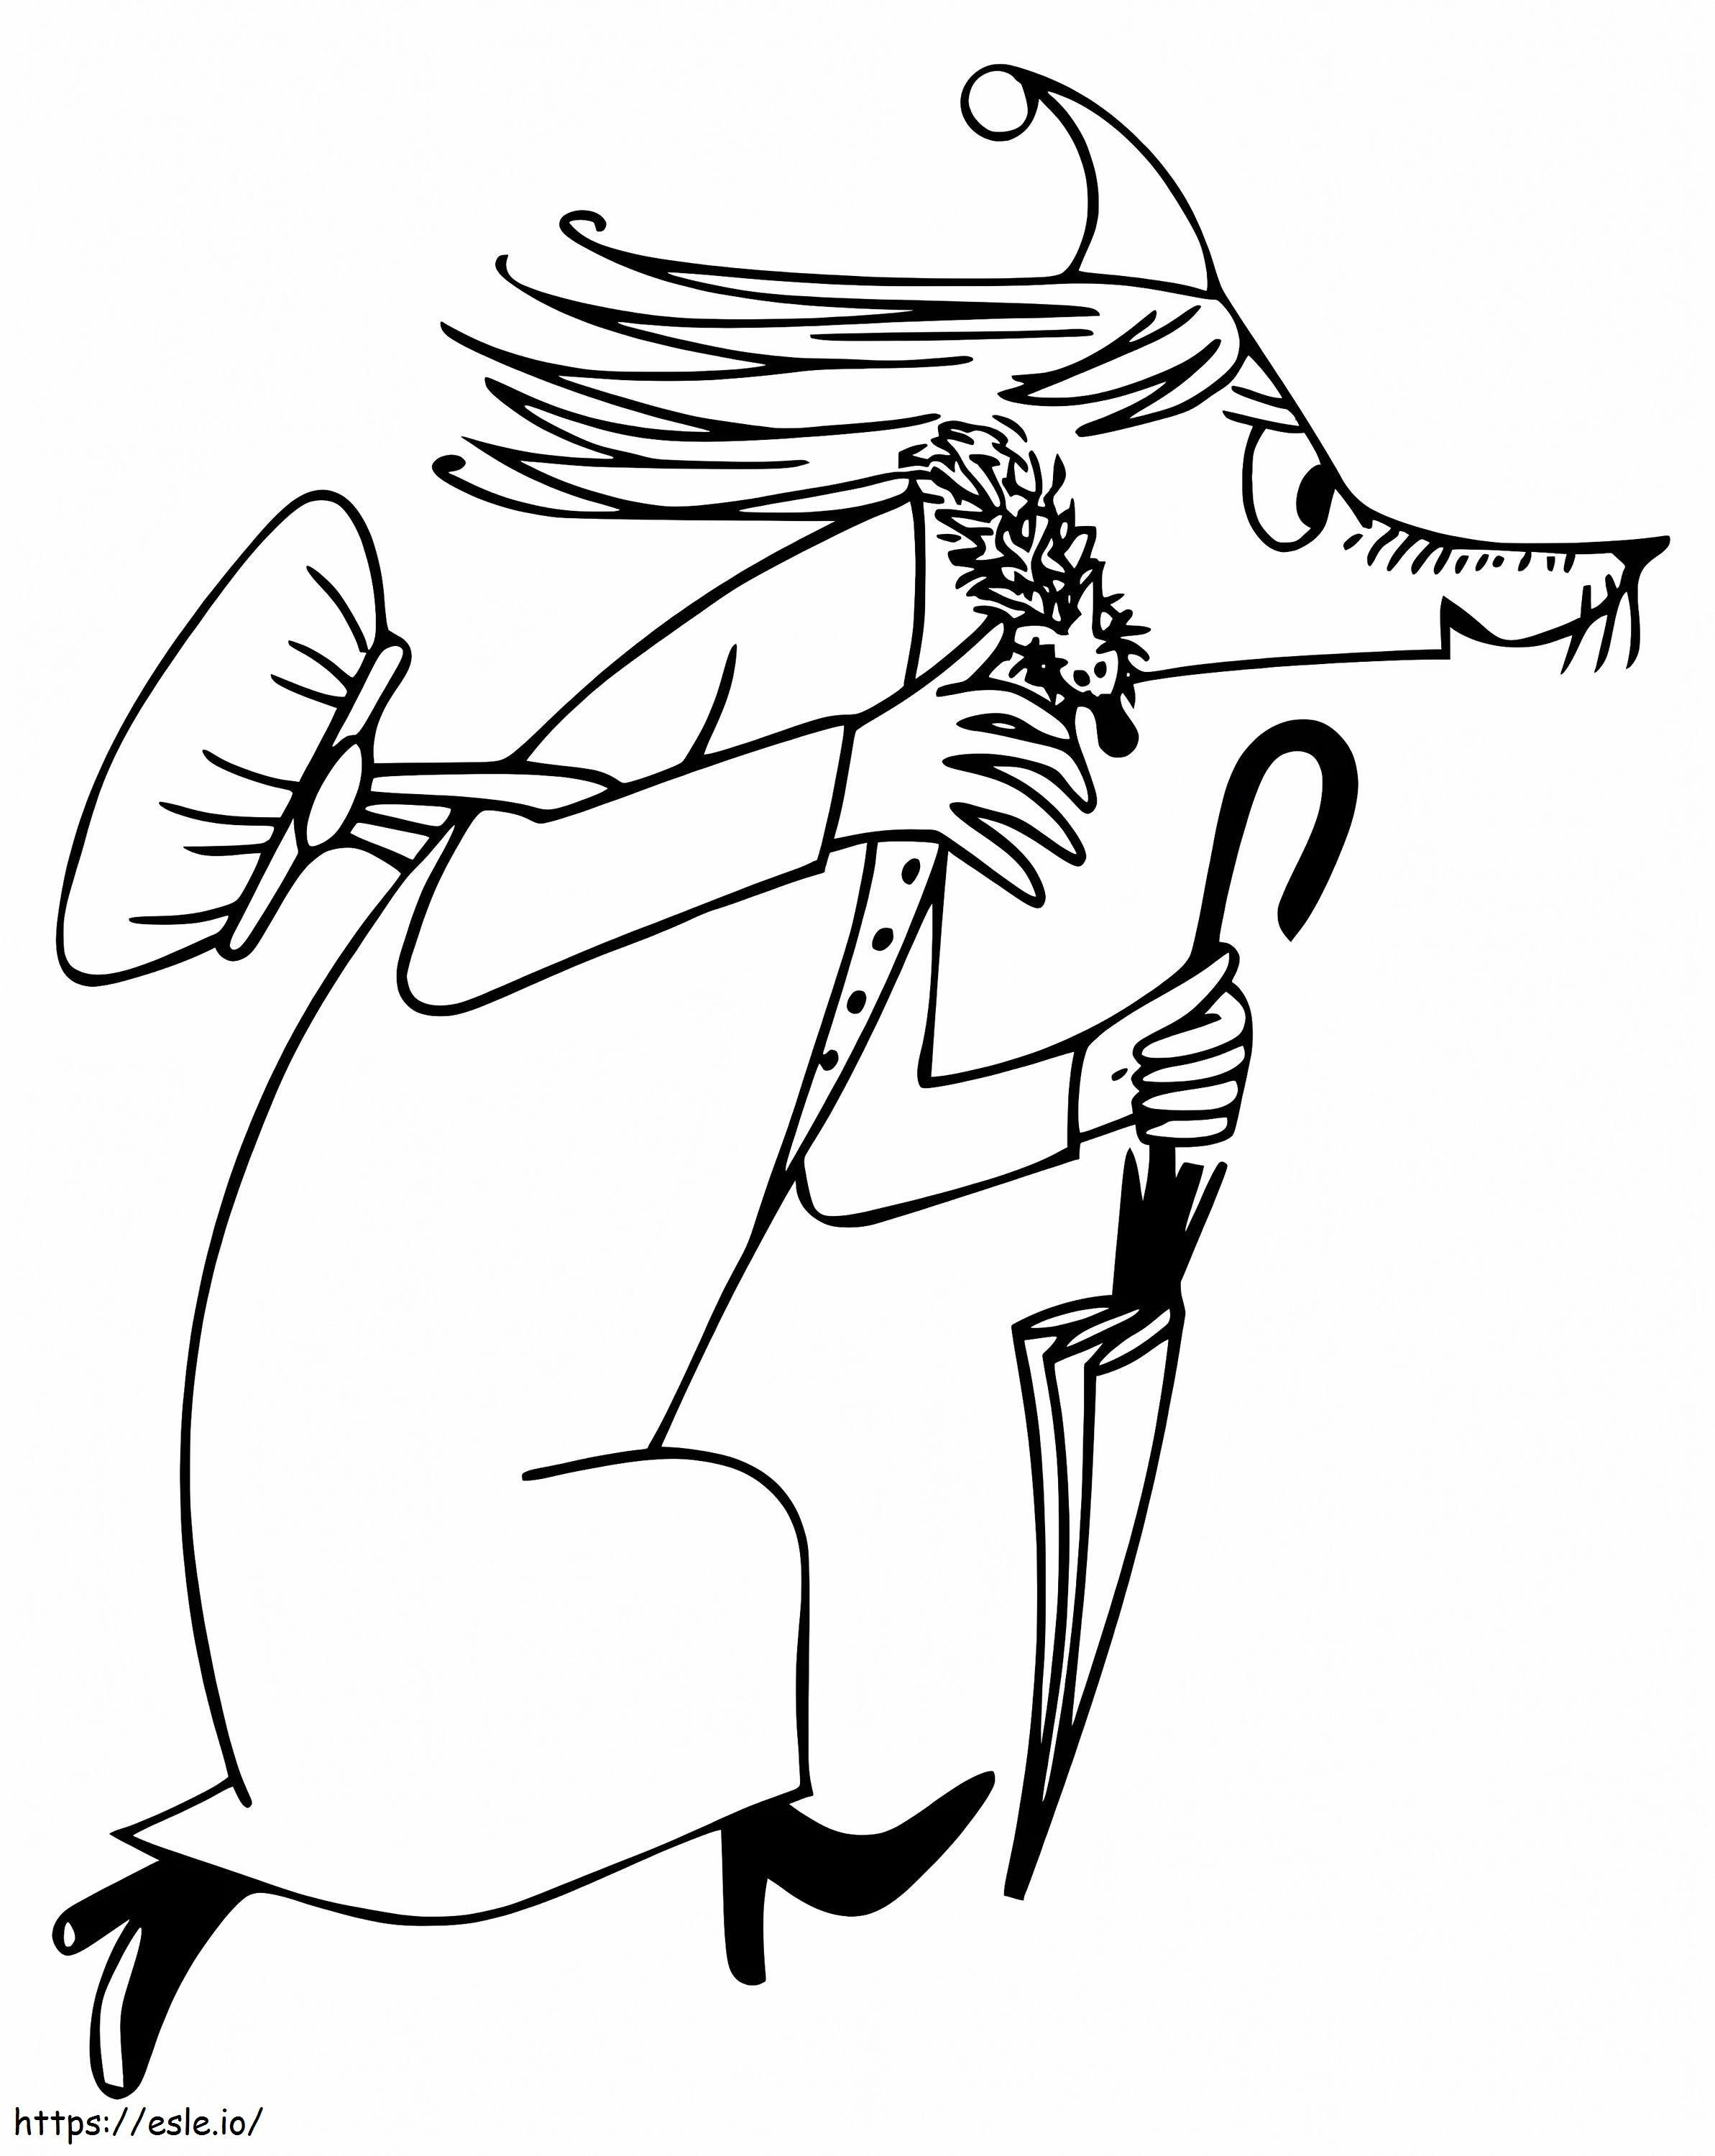 Fillyjonk From Moomin coloring page